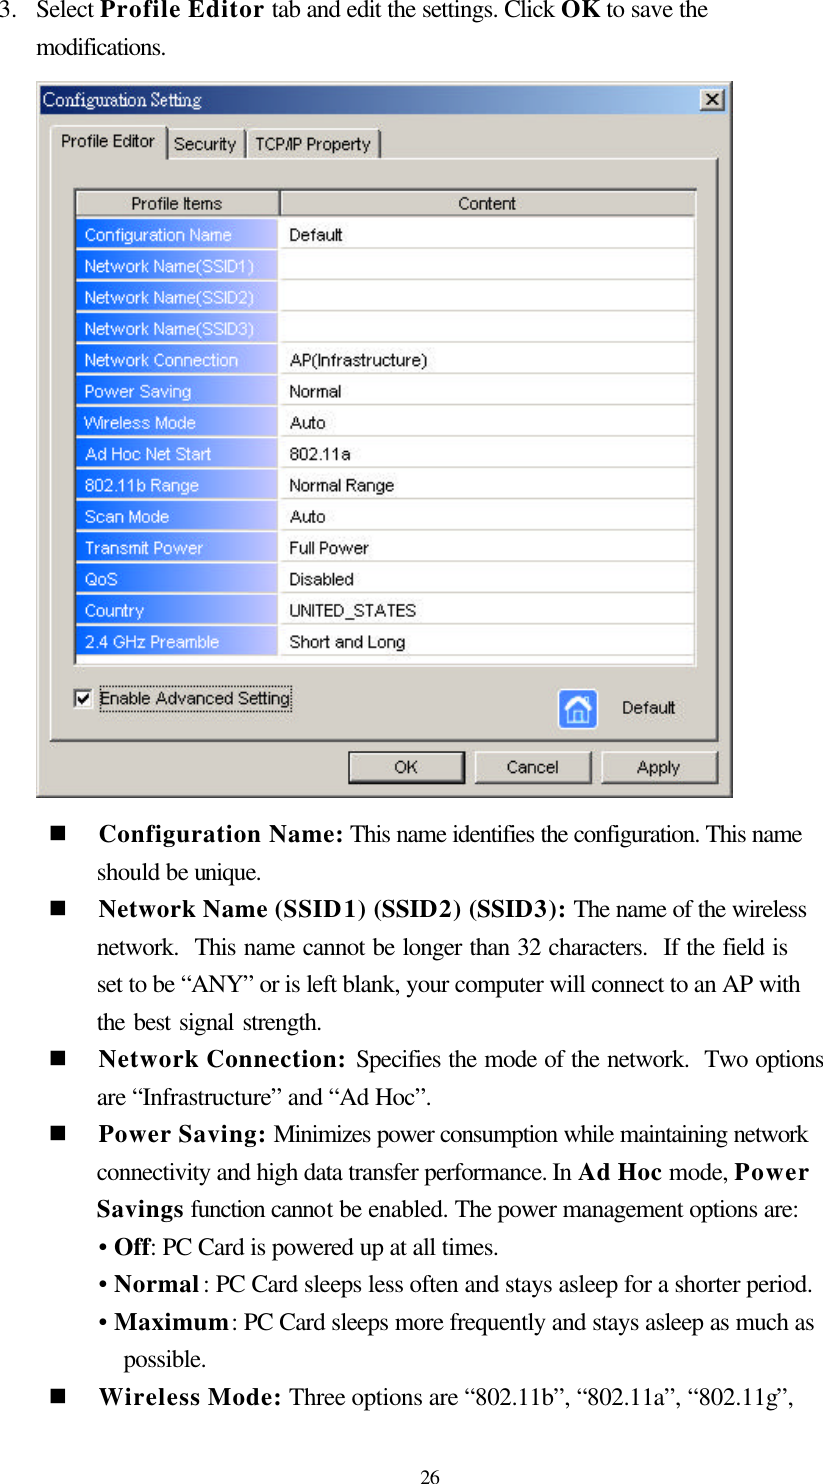  26 3.  Select Profile Editor tab and edit the settings. Click OK to save the modifications.    n Configuration Name: This name identifies the configuration. This name should be unique.  n Network Name (SSID1) (SSID2) (SSID3): The name of the wireless network.  This name cannot be longer than 32 characters.  If the field is set to be “ANY” or is left blank, your computer will connect to an AP with the best signal strength.   n Network Connection: Specifies the mode of the network.  Two options are “Infrastructure” and “Ad Hoc”. n Power Saving: Minimizes power consumption while maintaining network connectivity and high data transfer performance. In Ad Hoc mode, Power Savings function cannot be enabled. The power management options are:  • Off: PC Card is powered up at all times. • Normal: PC Card sleeps less often and stays asleep for a shorter period. • Maximum: PC Card sleeps more frequently and stays asleep as much as possible. n Wireless Mode: Three options are “802.11b”, “802.11a”, “802.11g”, 